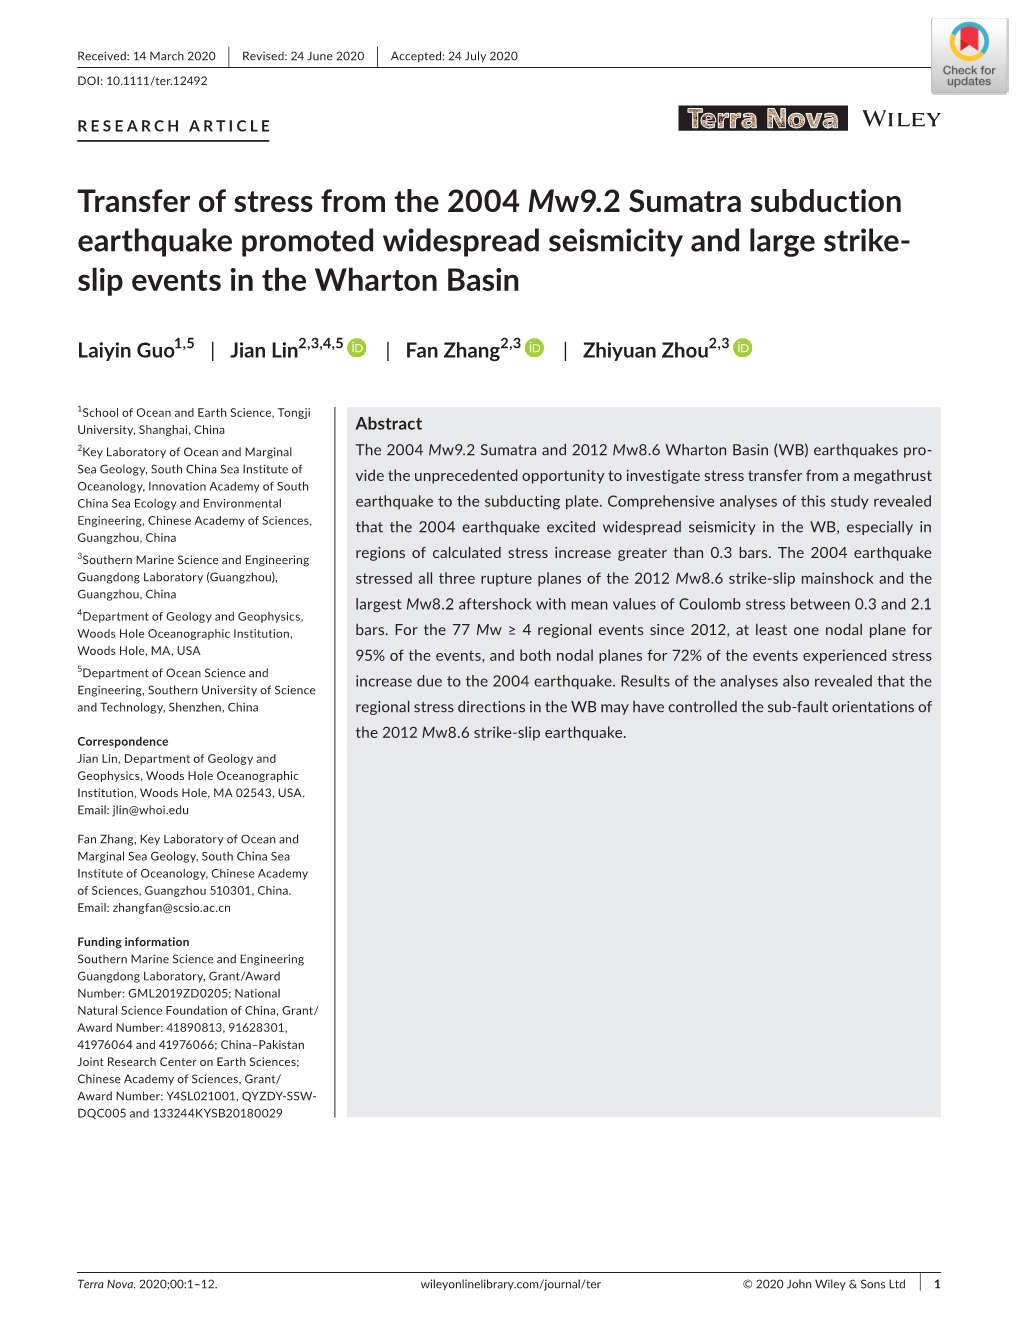 Transfer of Stress from the 2004 Mw9.2 Sumatra Subduction Earthquake Promoted Widespread Seismicity and Large Strike- Slip Events in the Wharton Basin